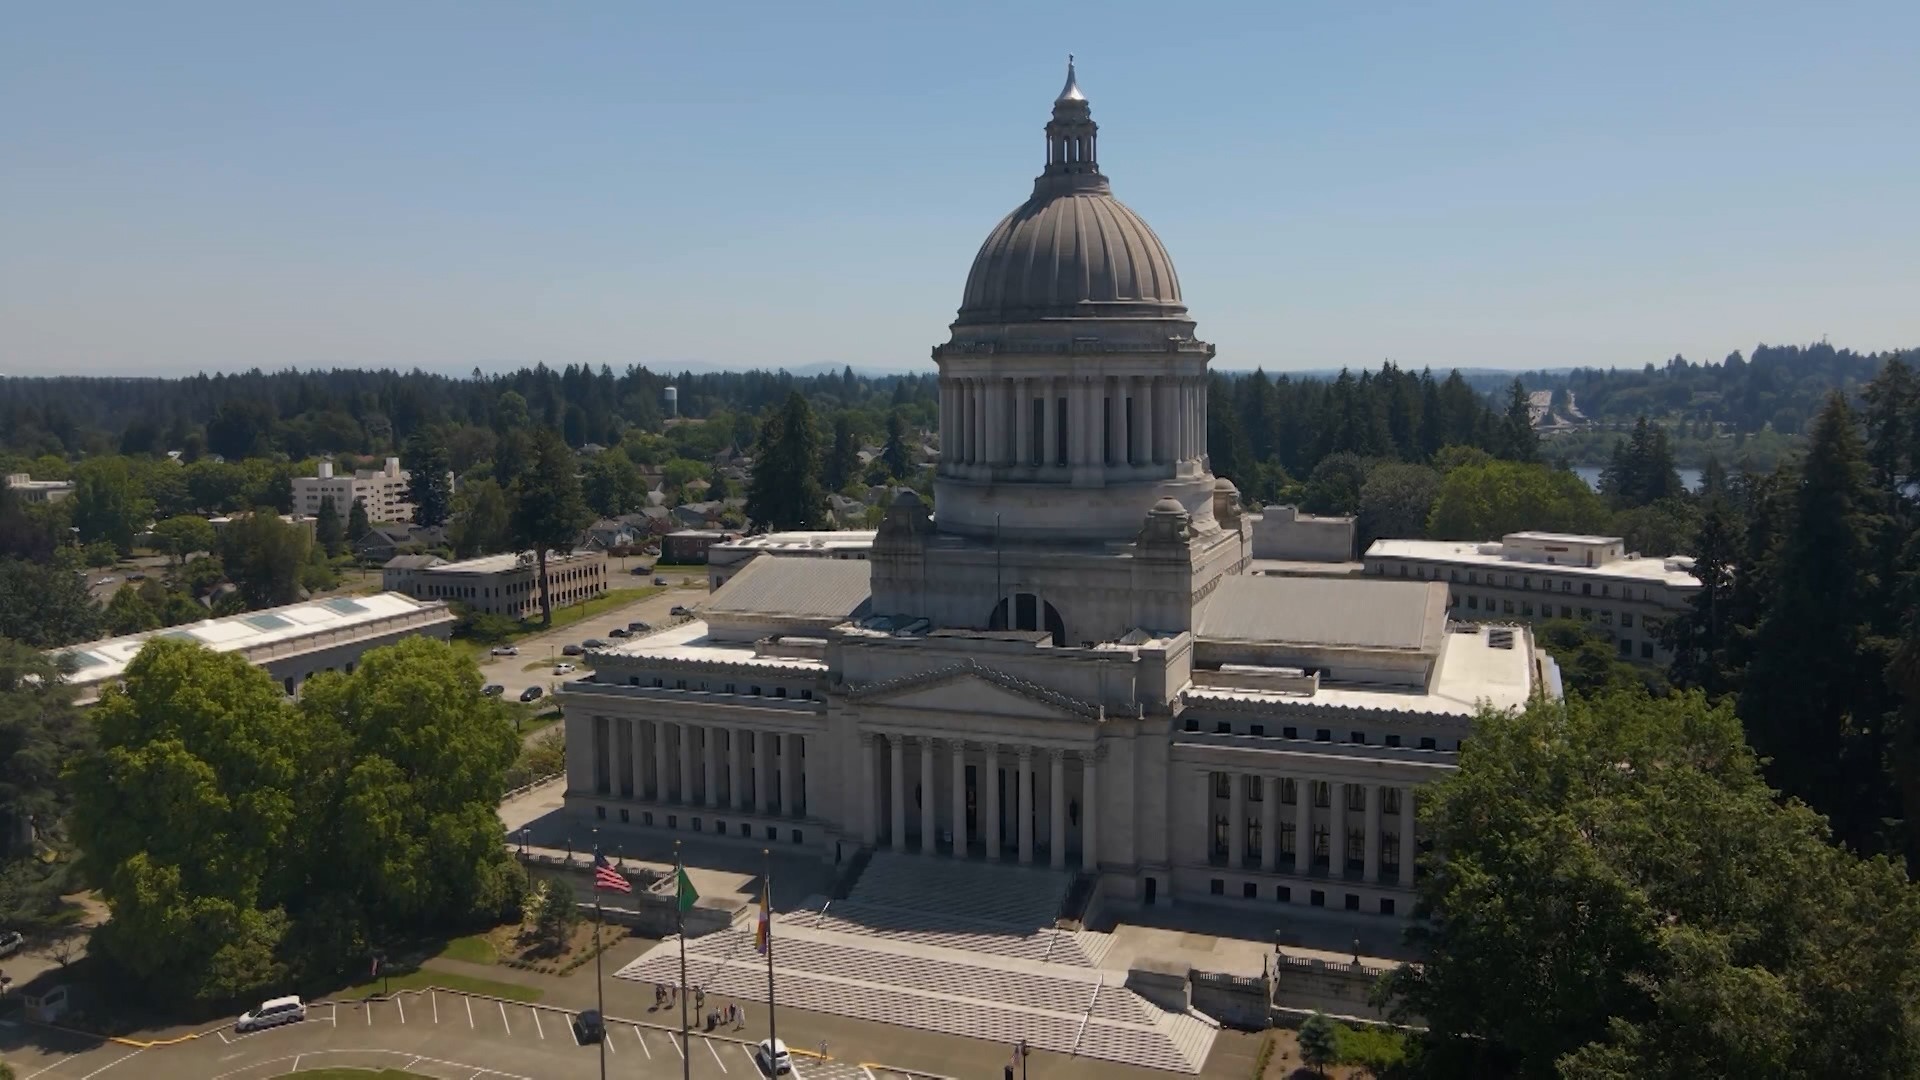 Washington State Legislators have one week to finish up their business in Olympia, including public safety bills and those dealing with social issues.